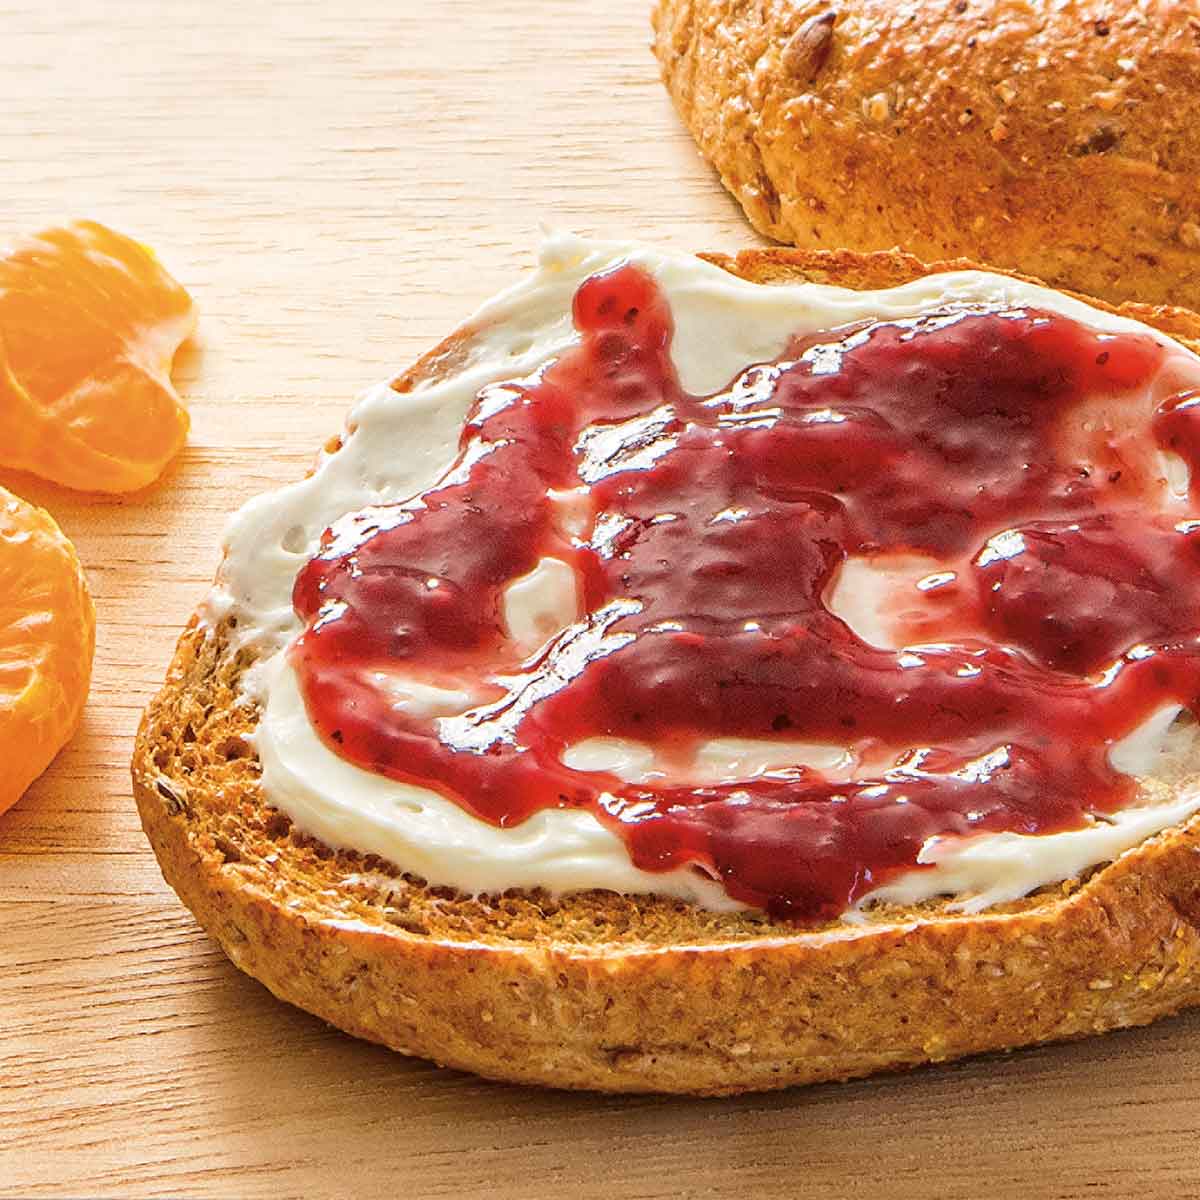 Bagel with Cream Cheese and Jammin'